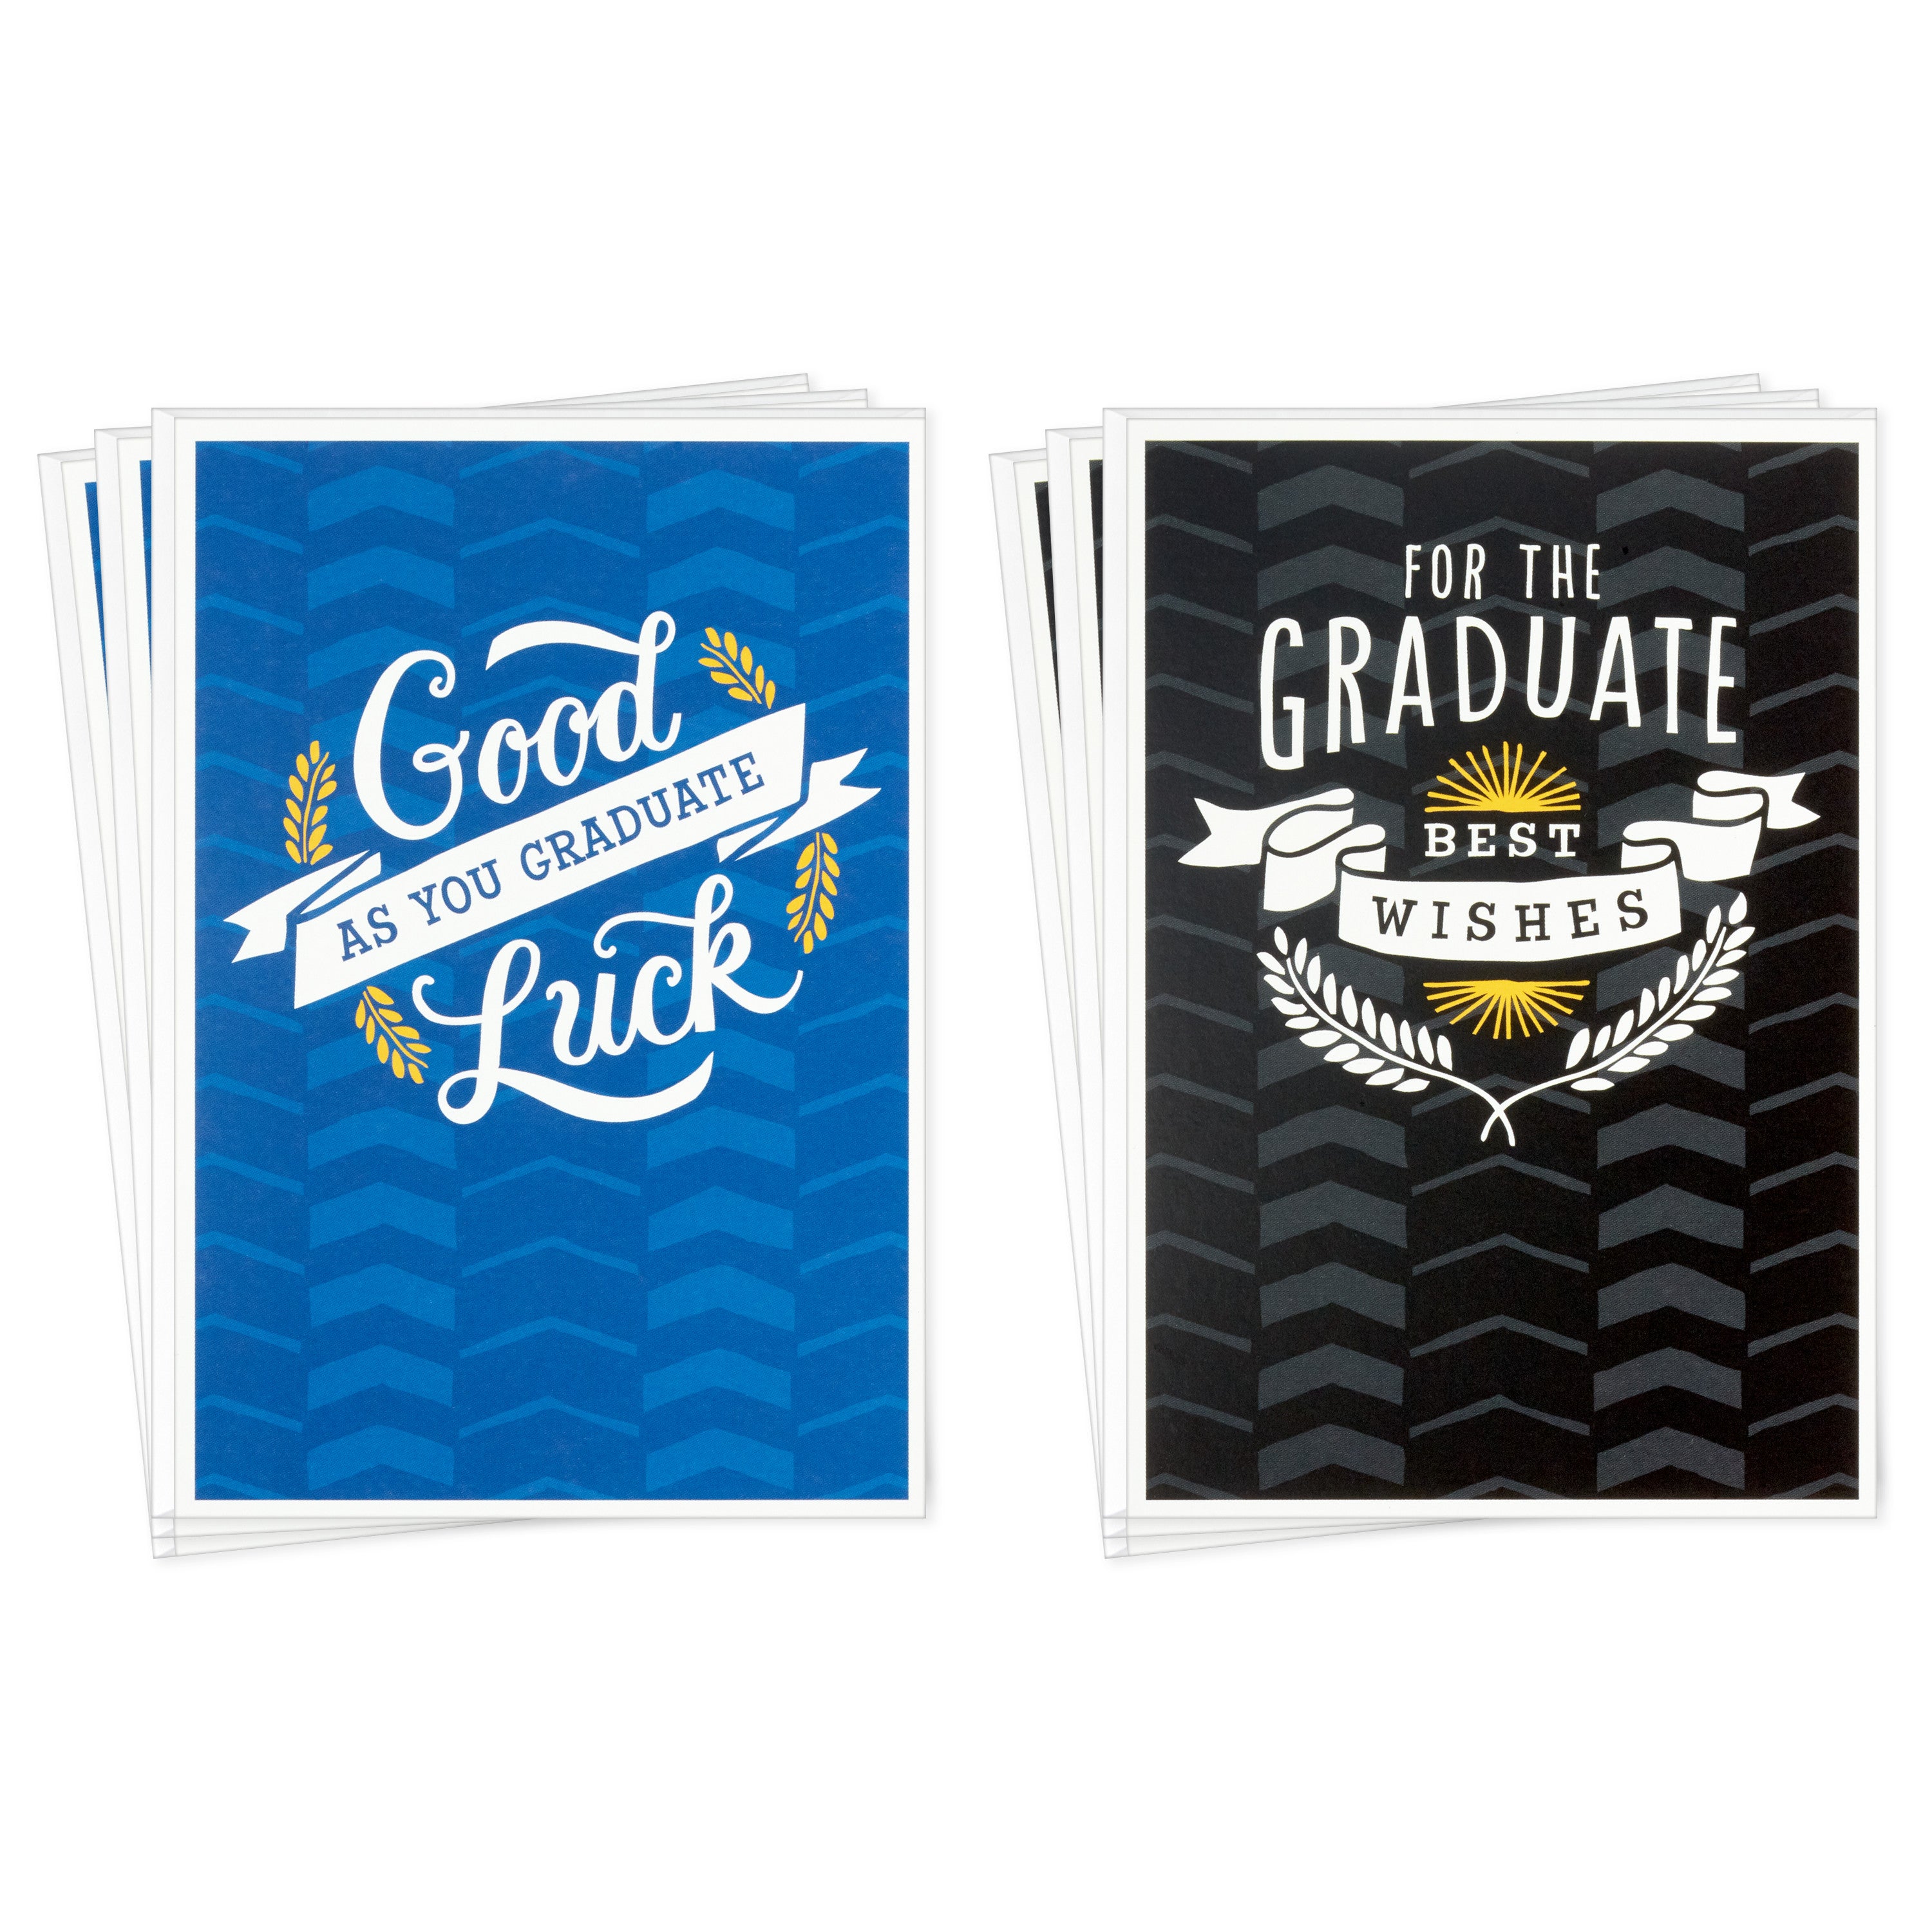 Graduation Cards Assortment, Good Luck (6 Cards with Envelopes, 2 Designs)